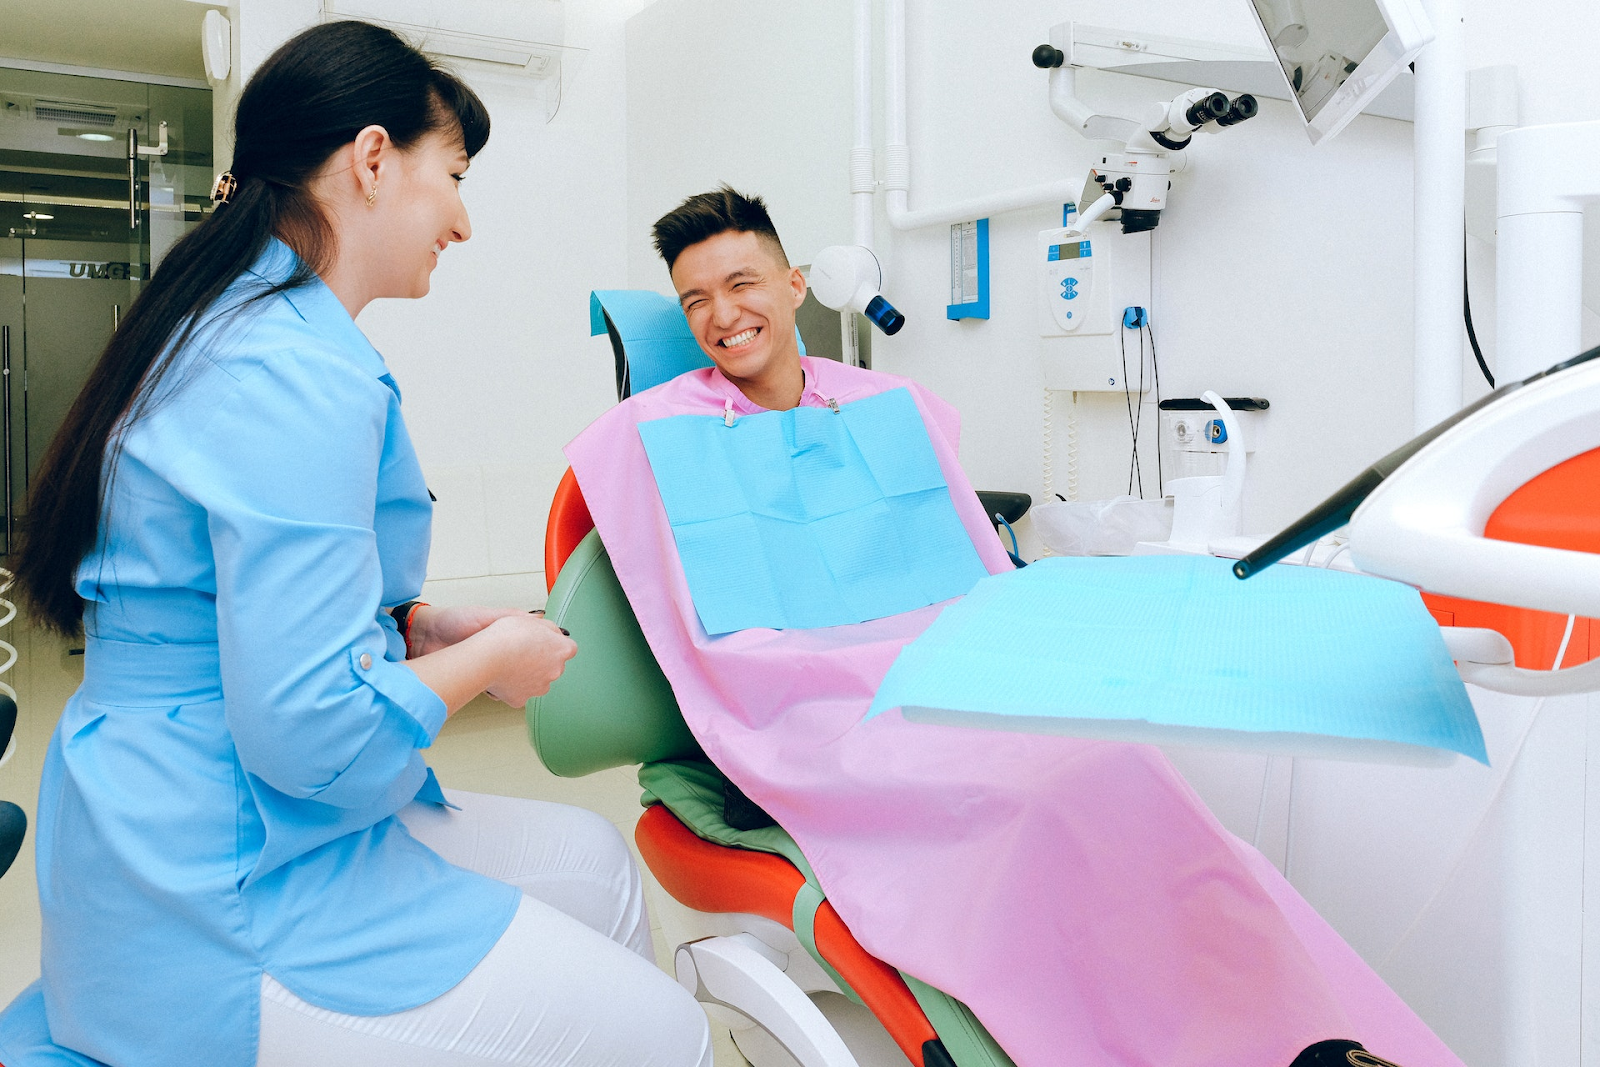 Graduates from dental hygiene school will be prepared to provide treatment to patients and educate patients about maintaining good oral health.